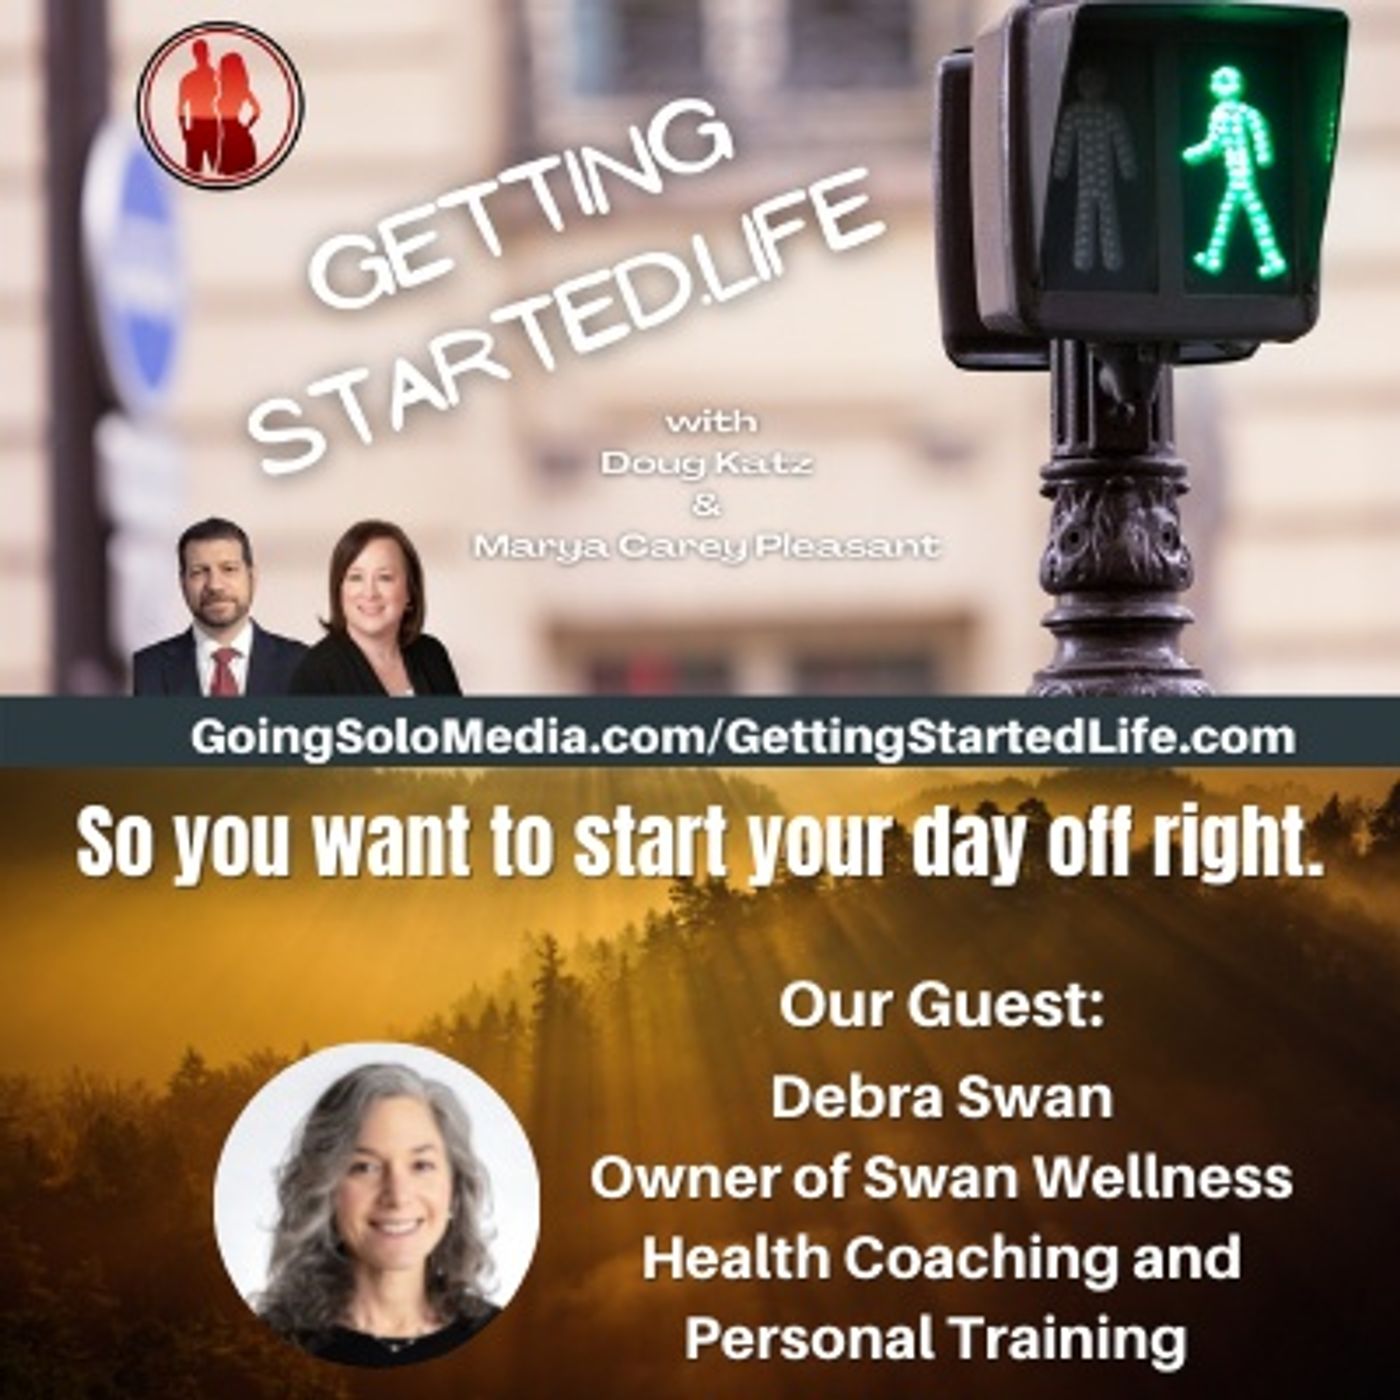 Getting Started.Life - So you want to start your day right